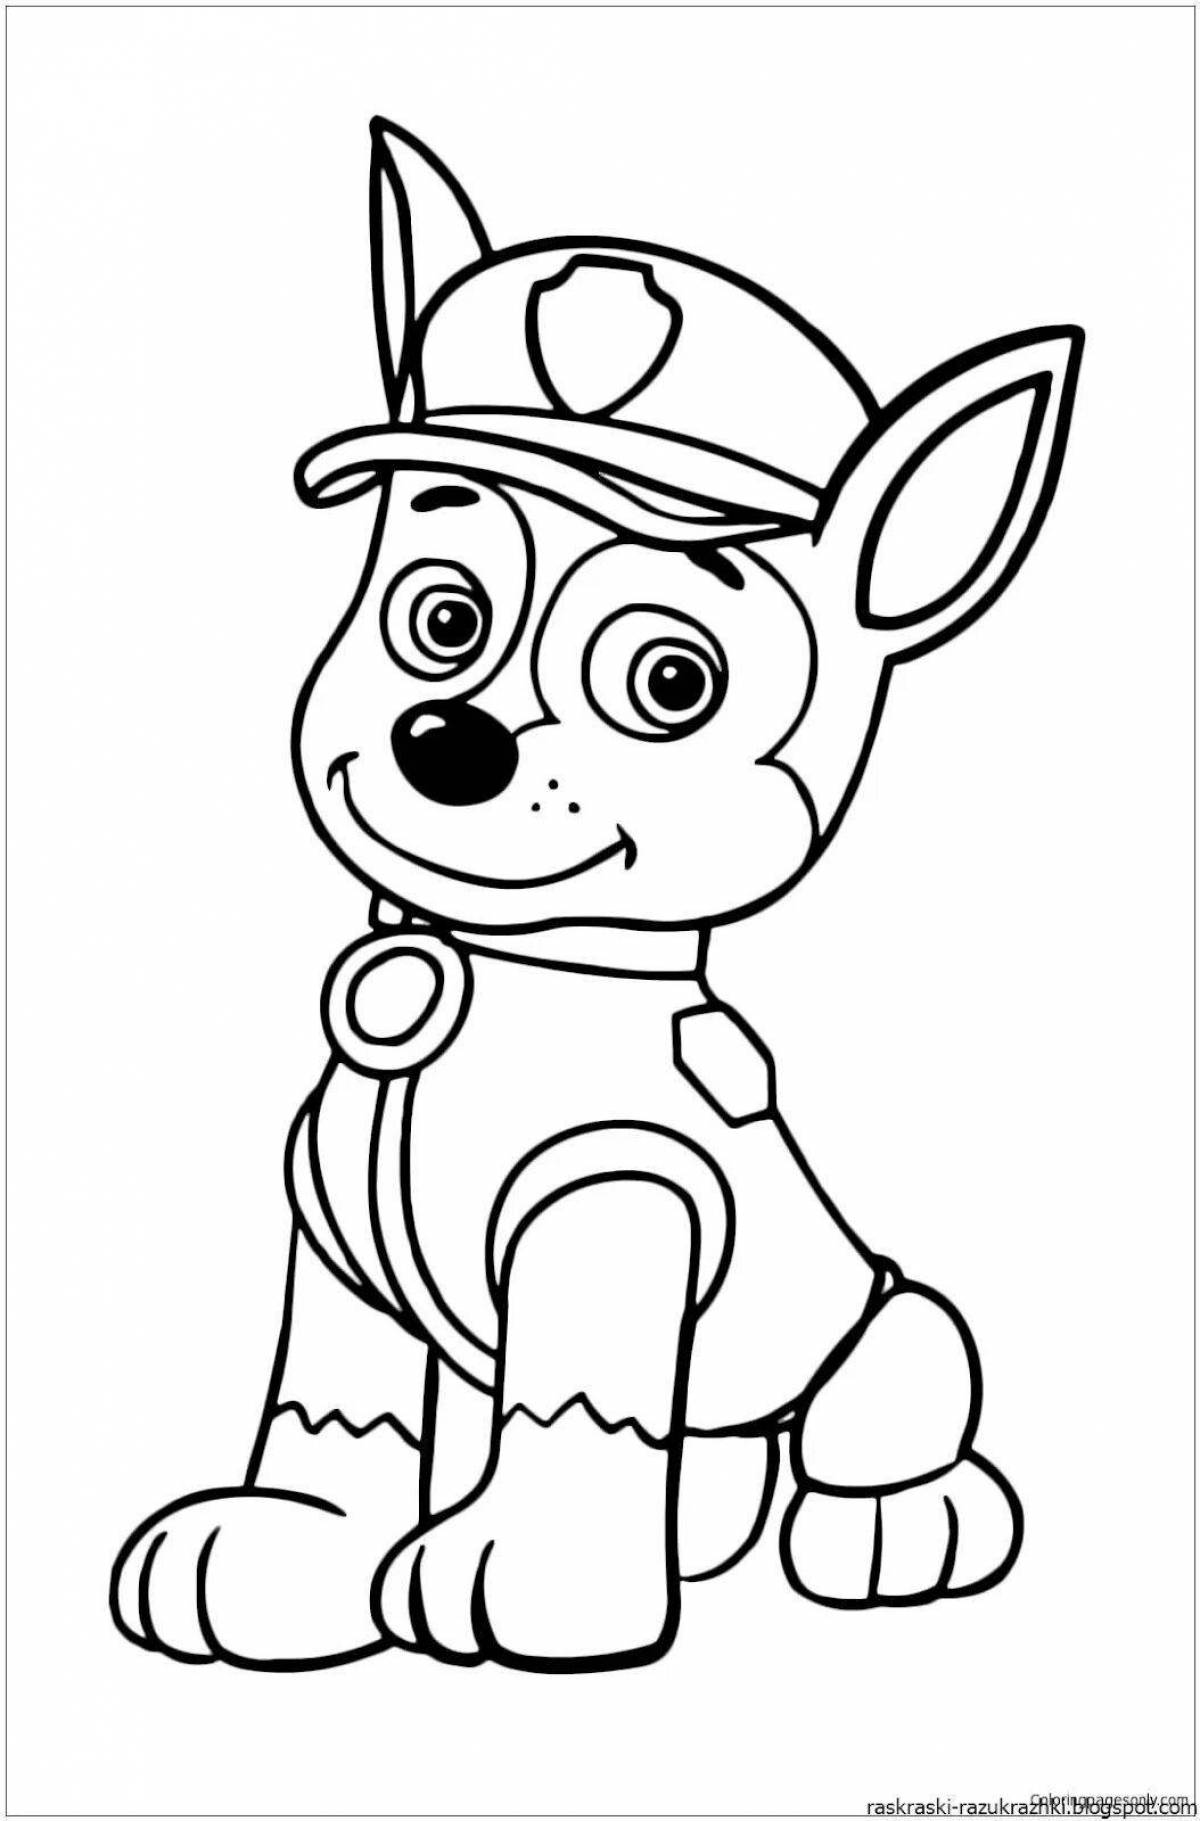 Outstanding Racer Coloring Page for Kids